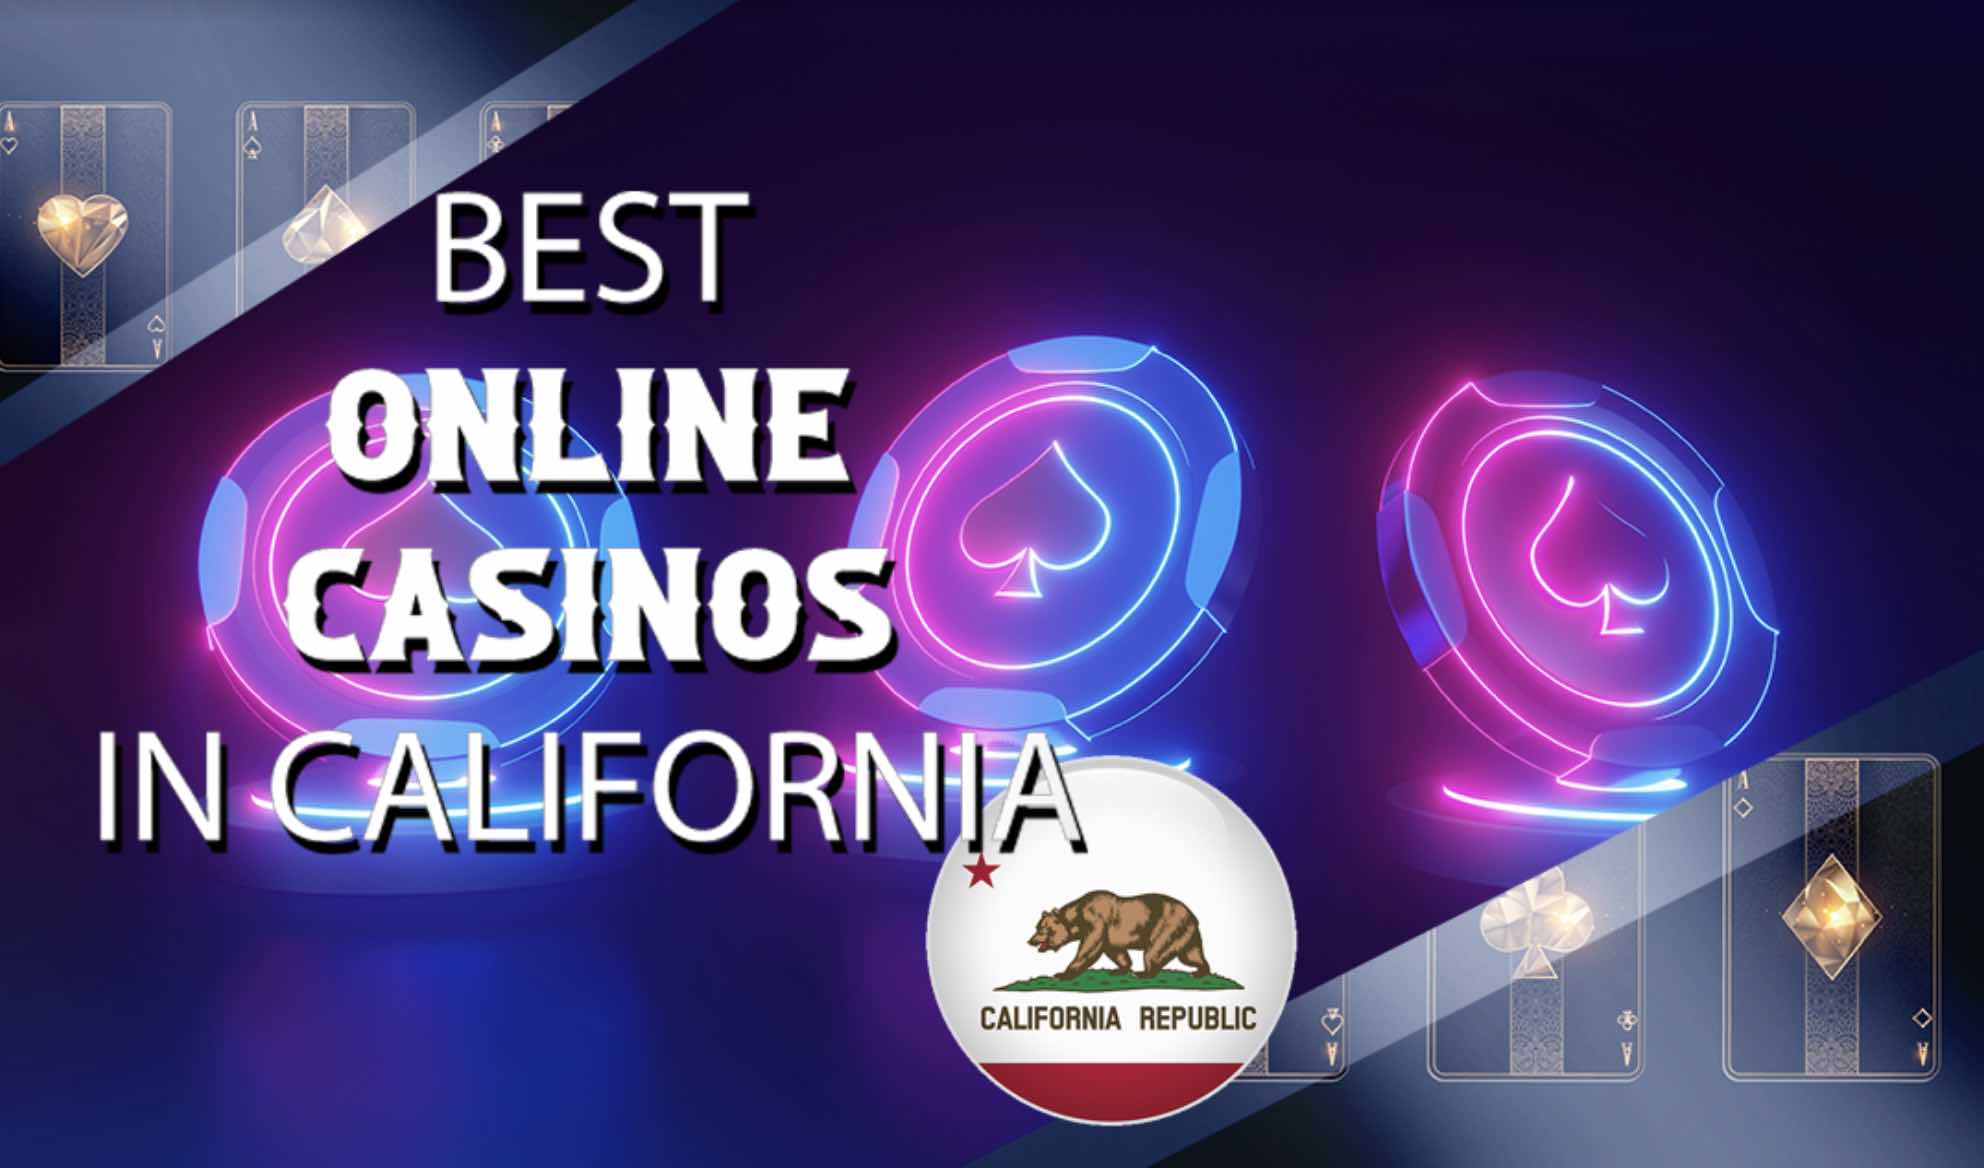 Does best online casino sites that accept jeton Sometimes Make You Feel Stupid?